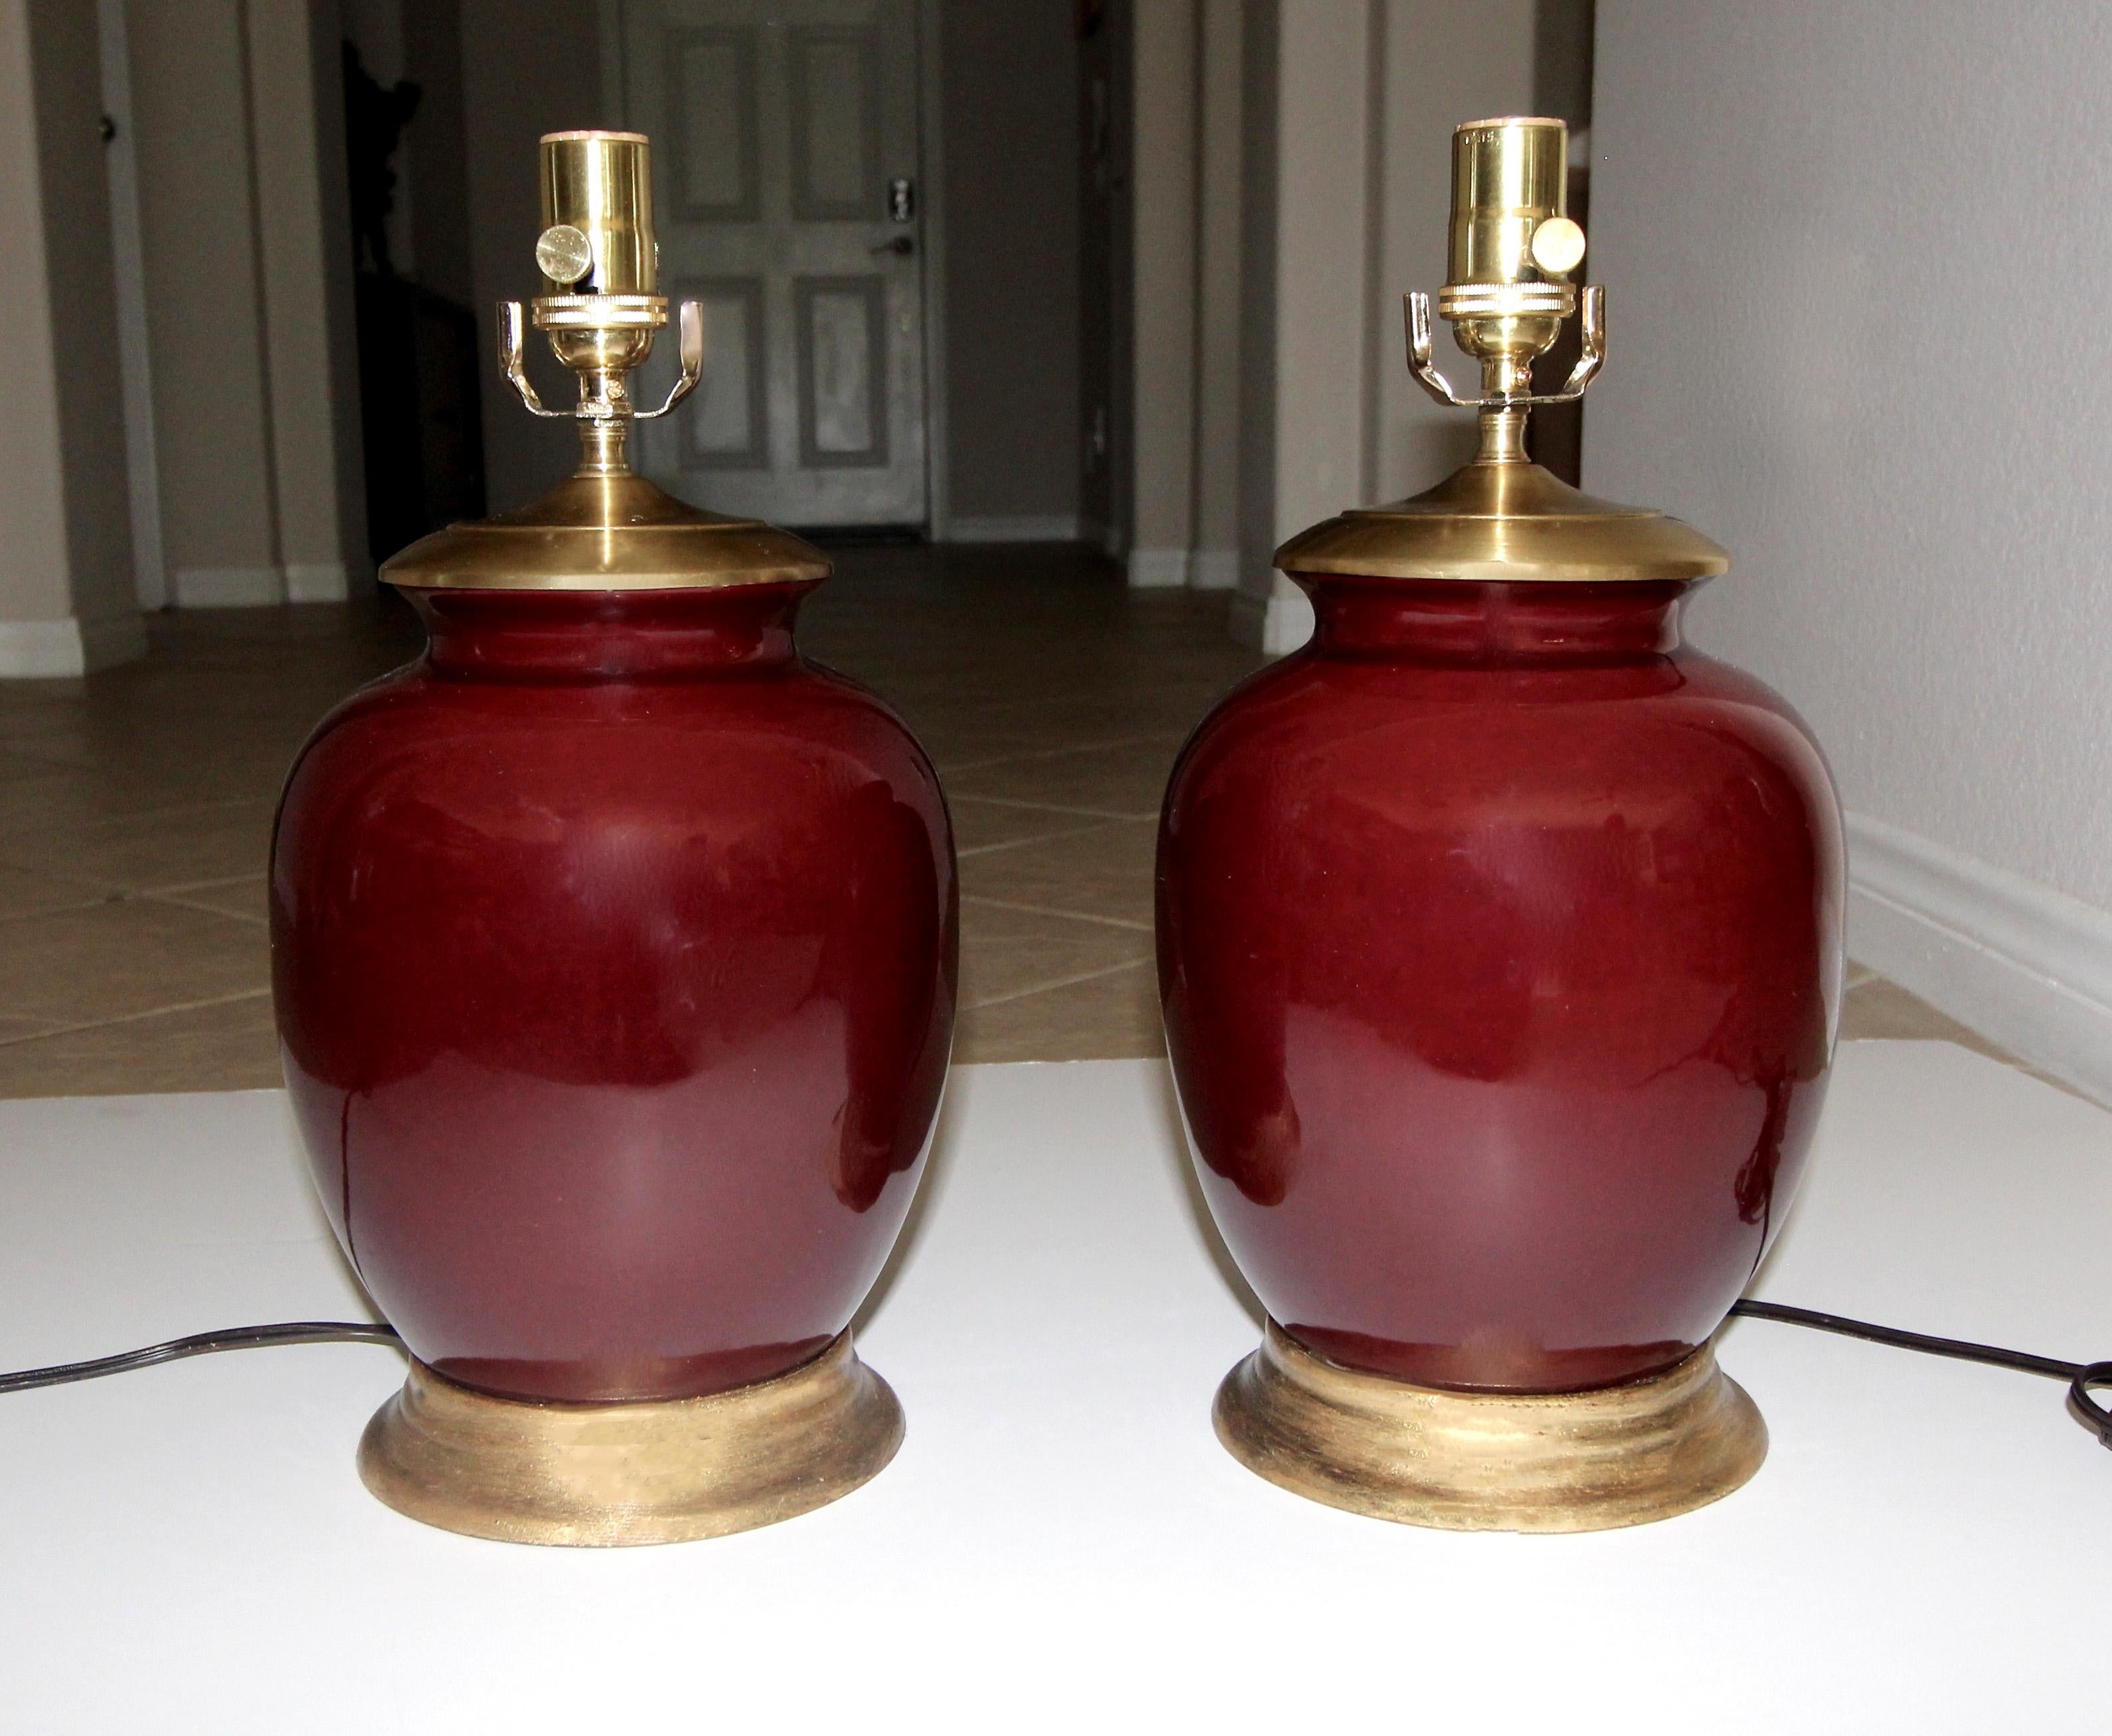 Pair of late Asian oxblood porcelain vases mounted on gilt turned wood lamp bases. Rewired with all new fittings and sockets. Smaller scale lamps, overall height top of socket 15